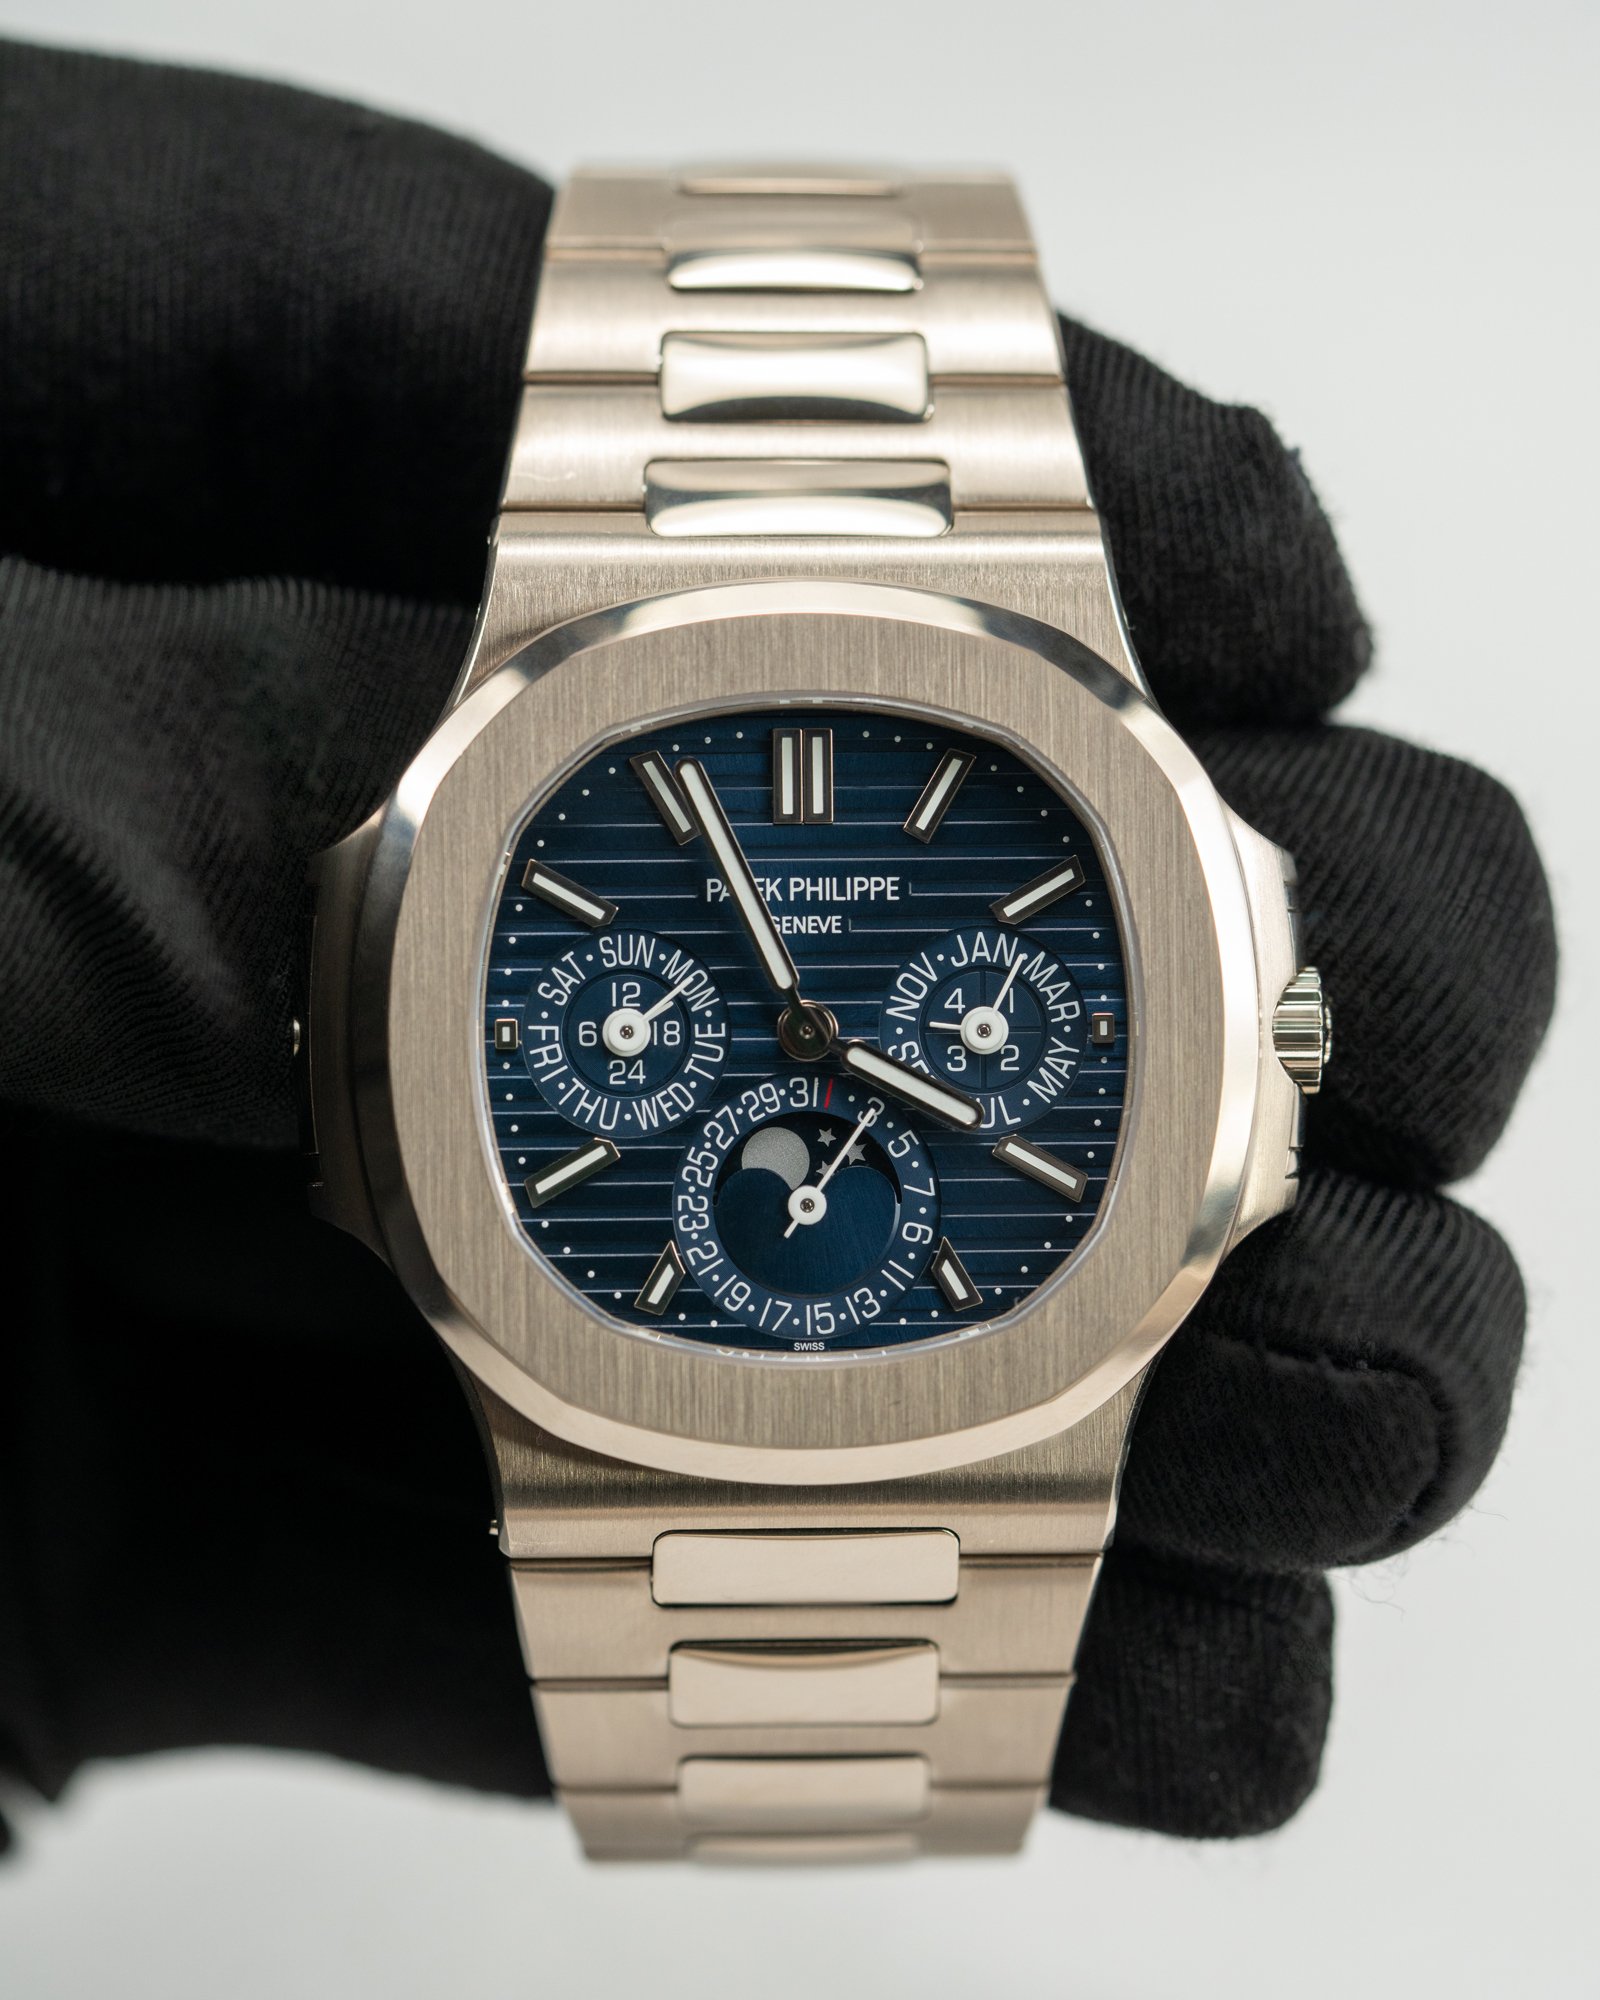 Patek Philippe] Over $300,000 For The Nautilus Perpetual Calendar 5740/1G?!  : r/Watches